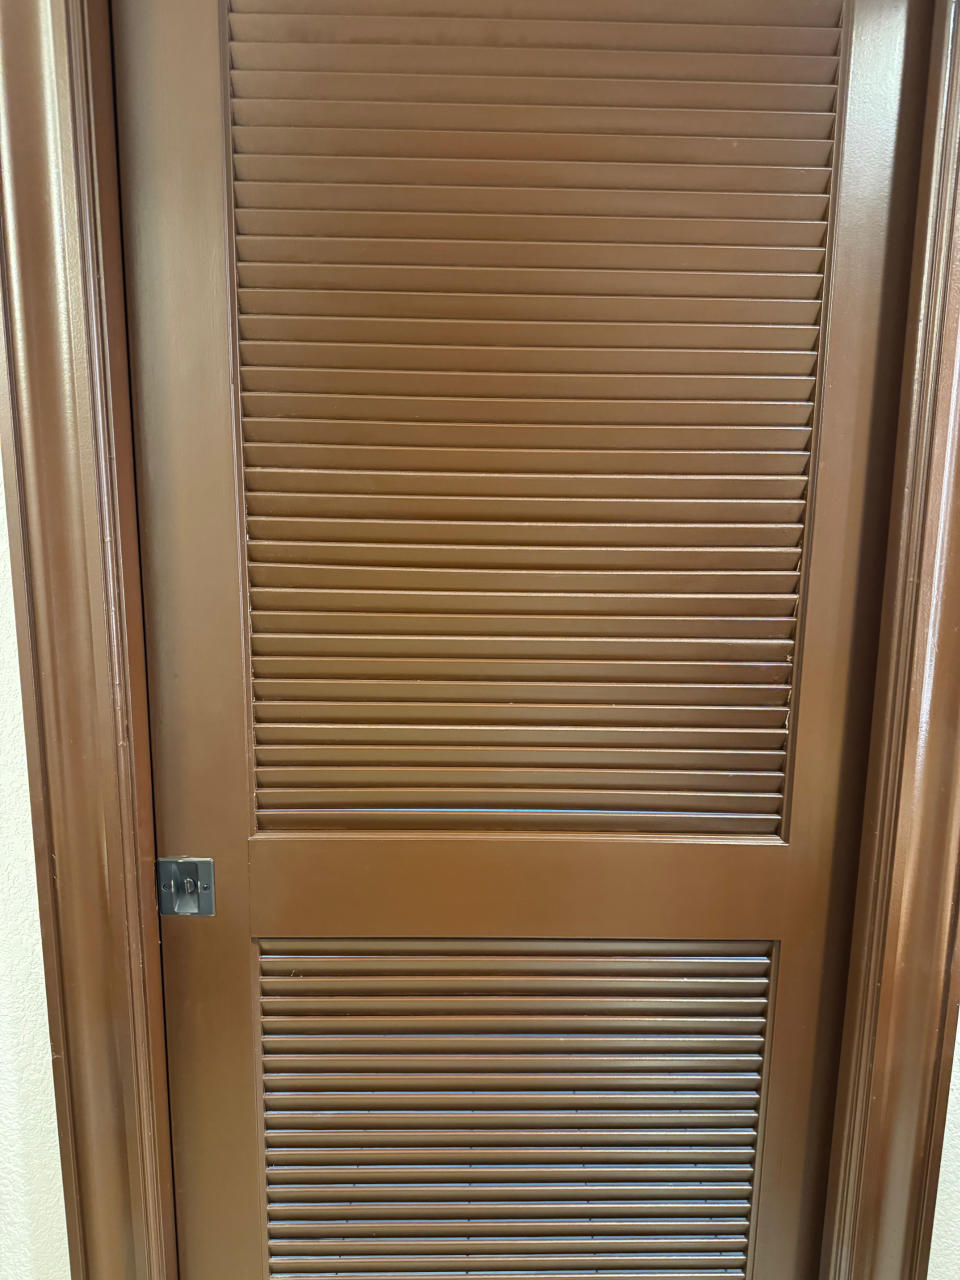 Brown door with horizontal slats, part of a building's interior architecture